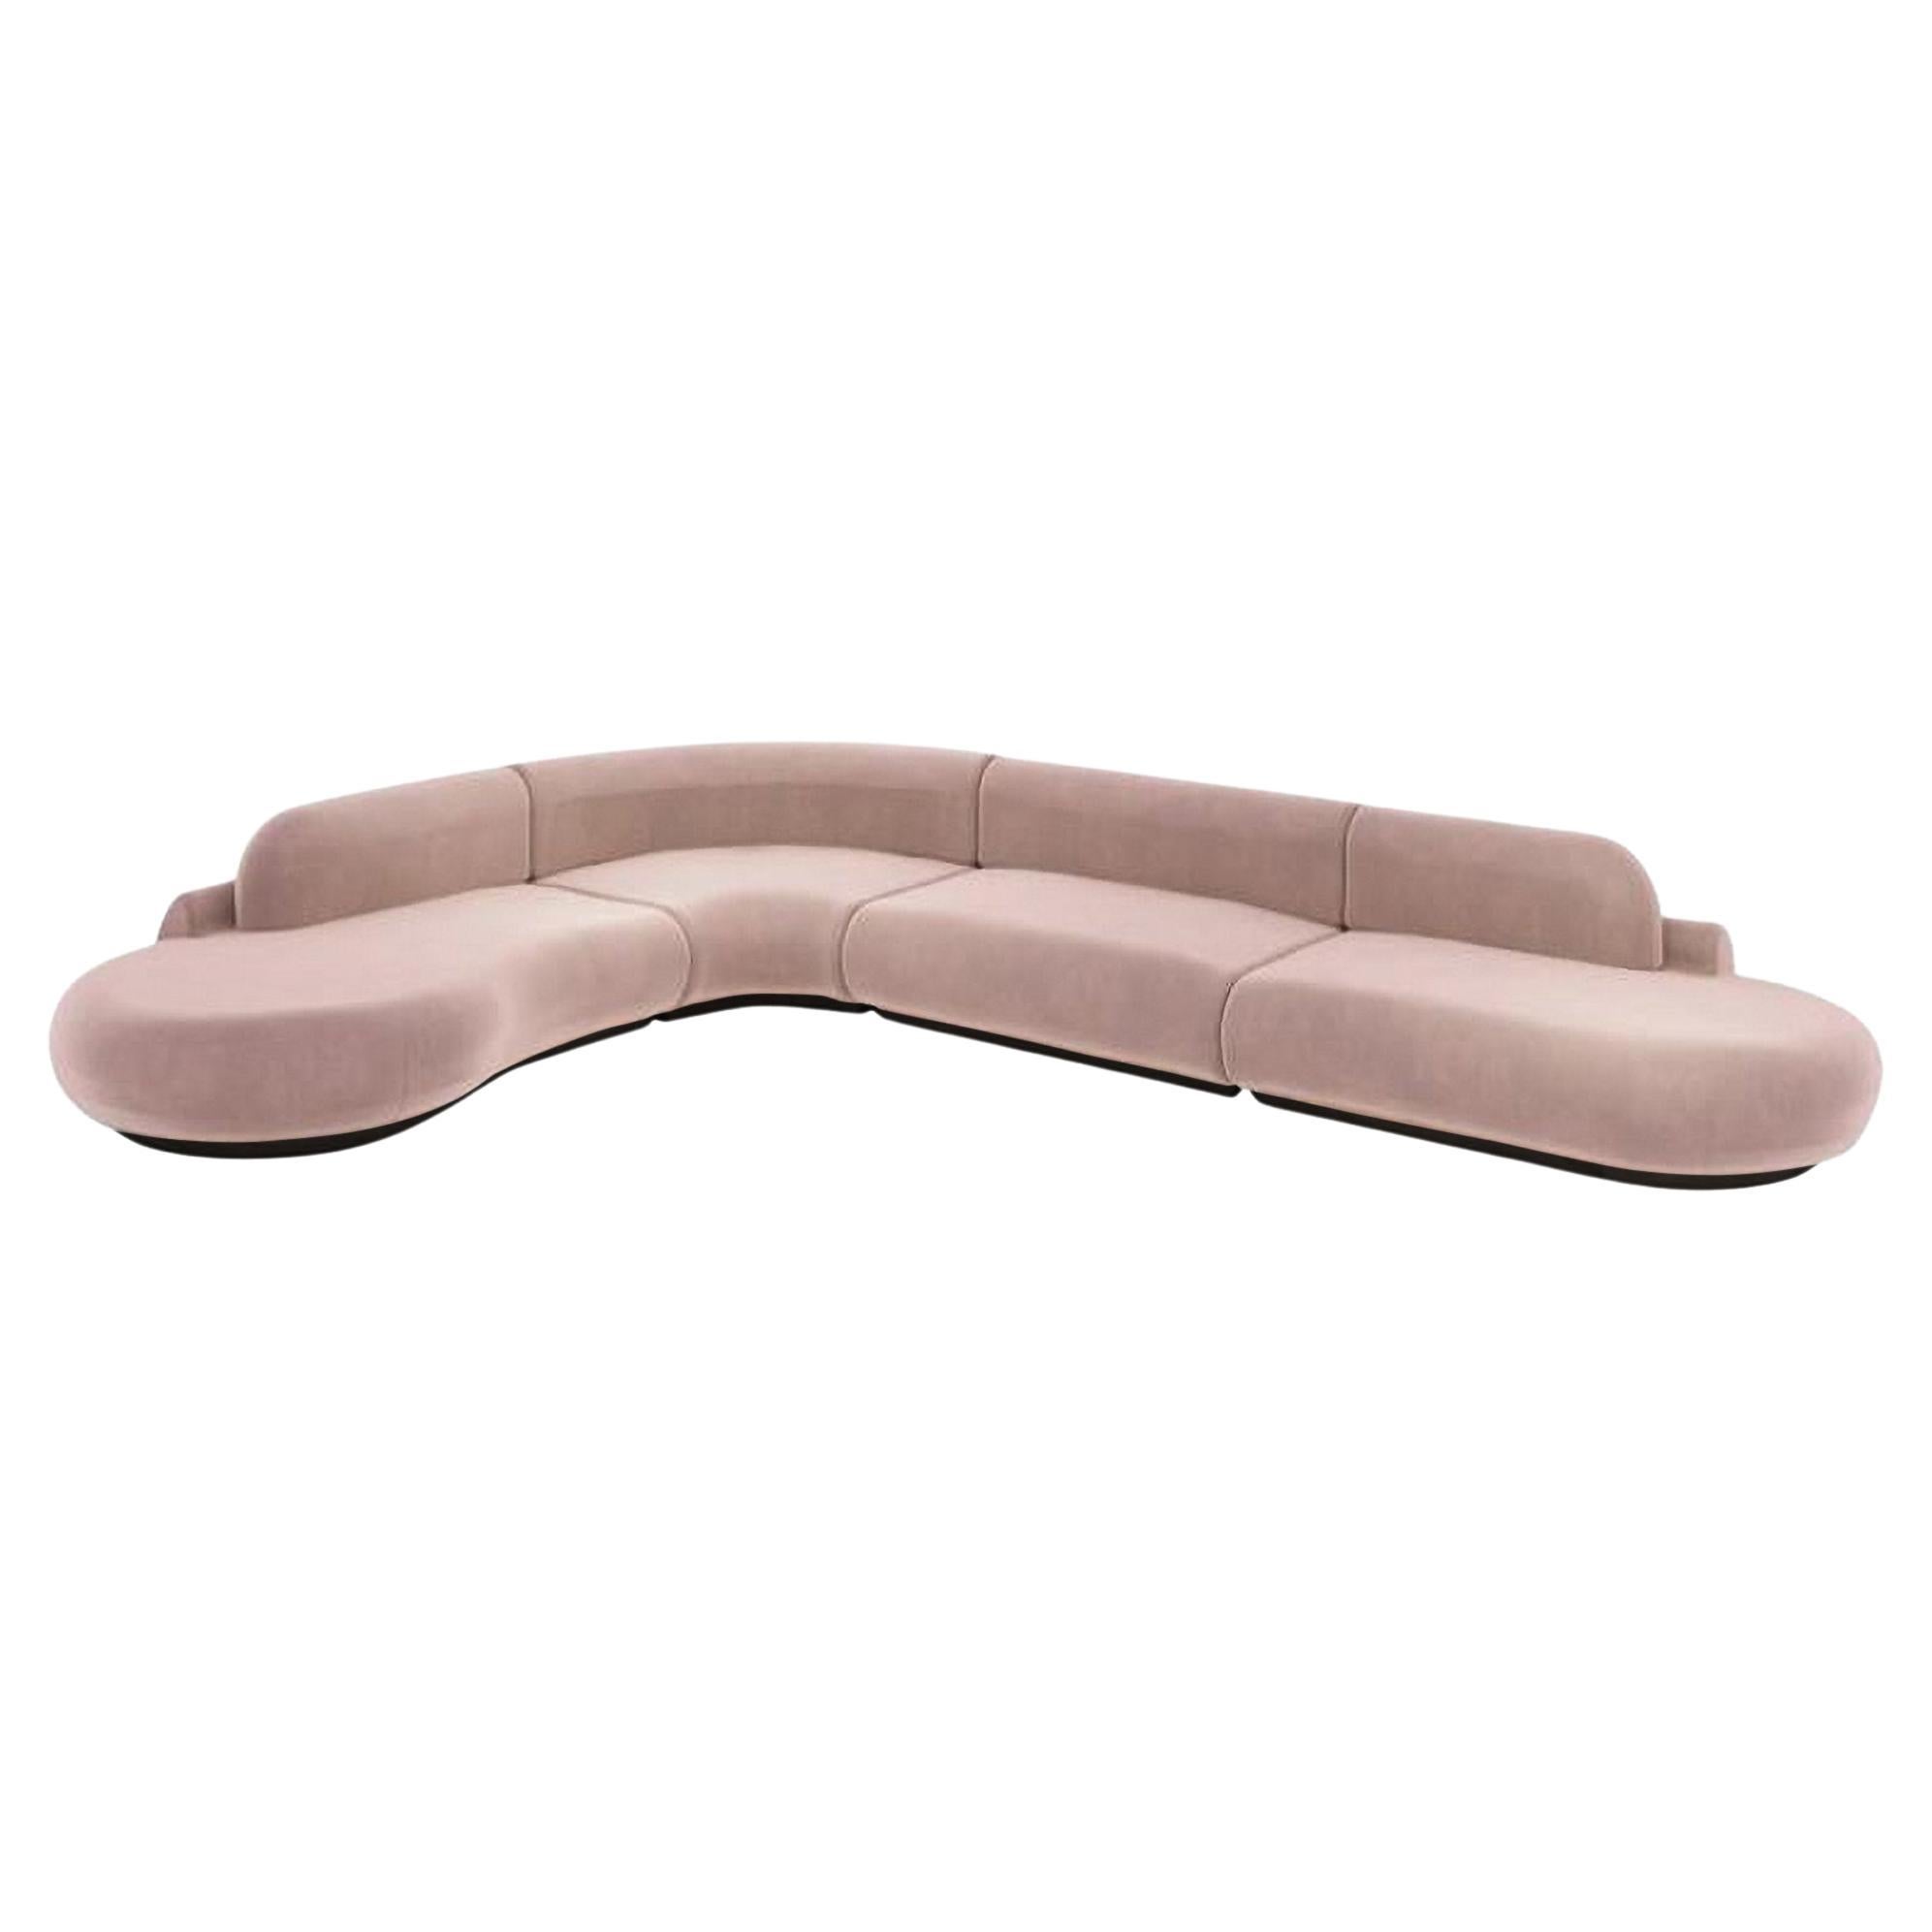 Naked Curved Sectional Sofa, 4 Piece with Beech Ash-056-5 and Paris Mouse For Sale